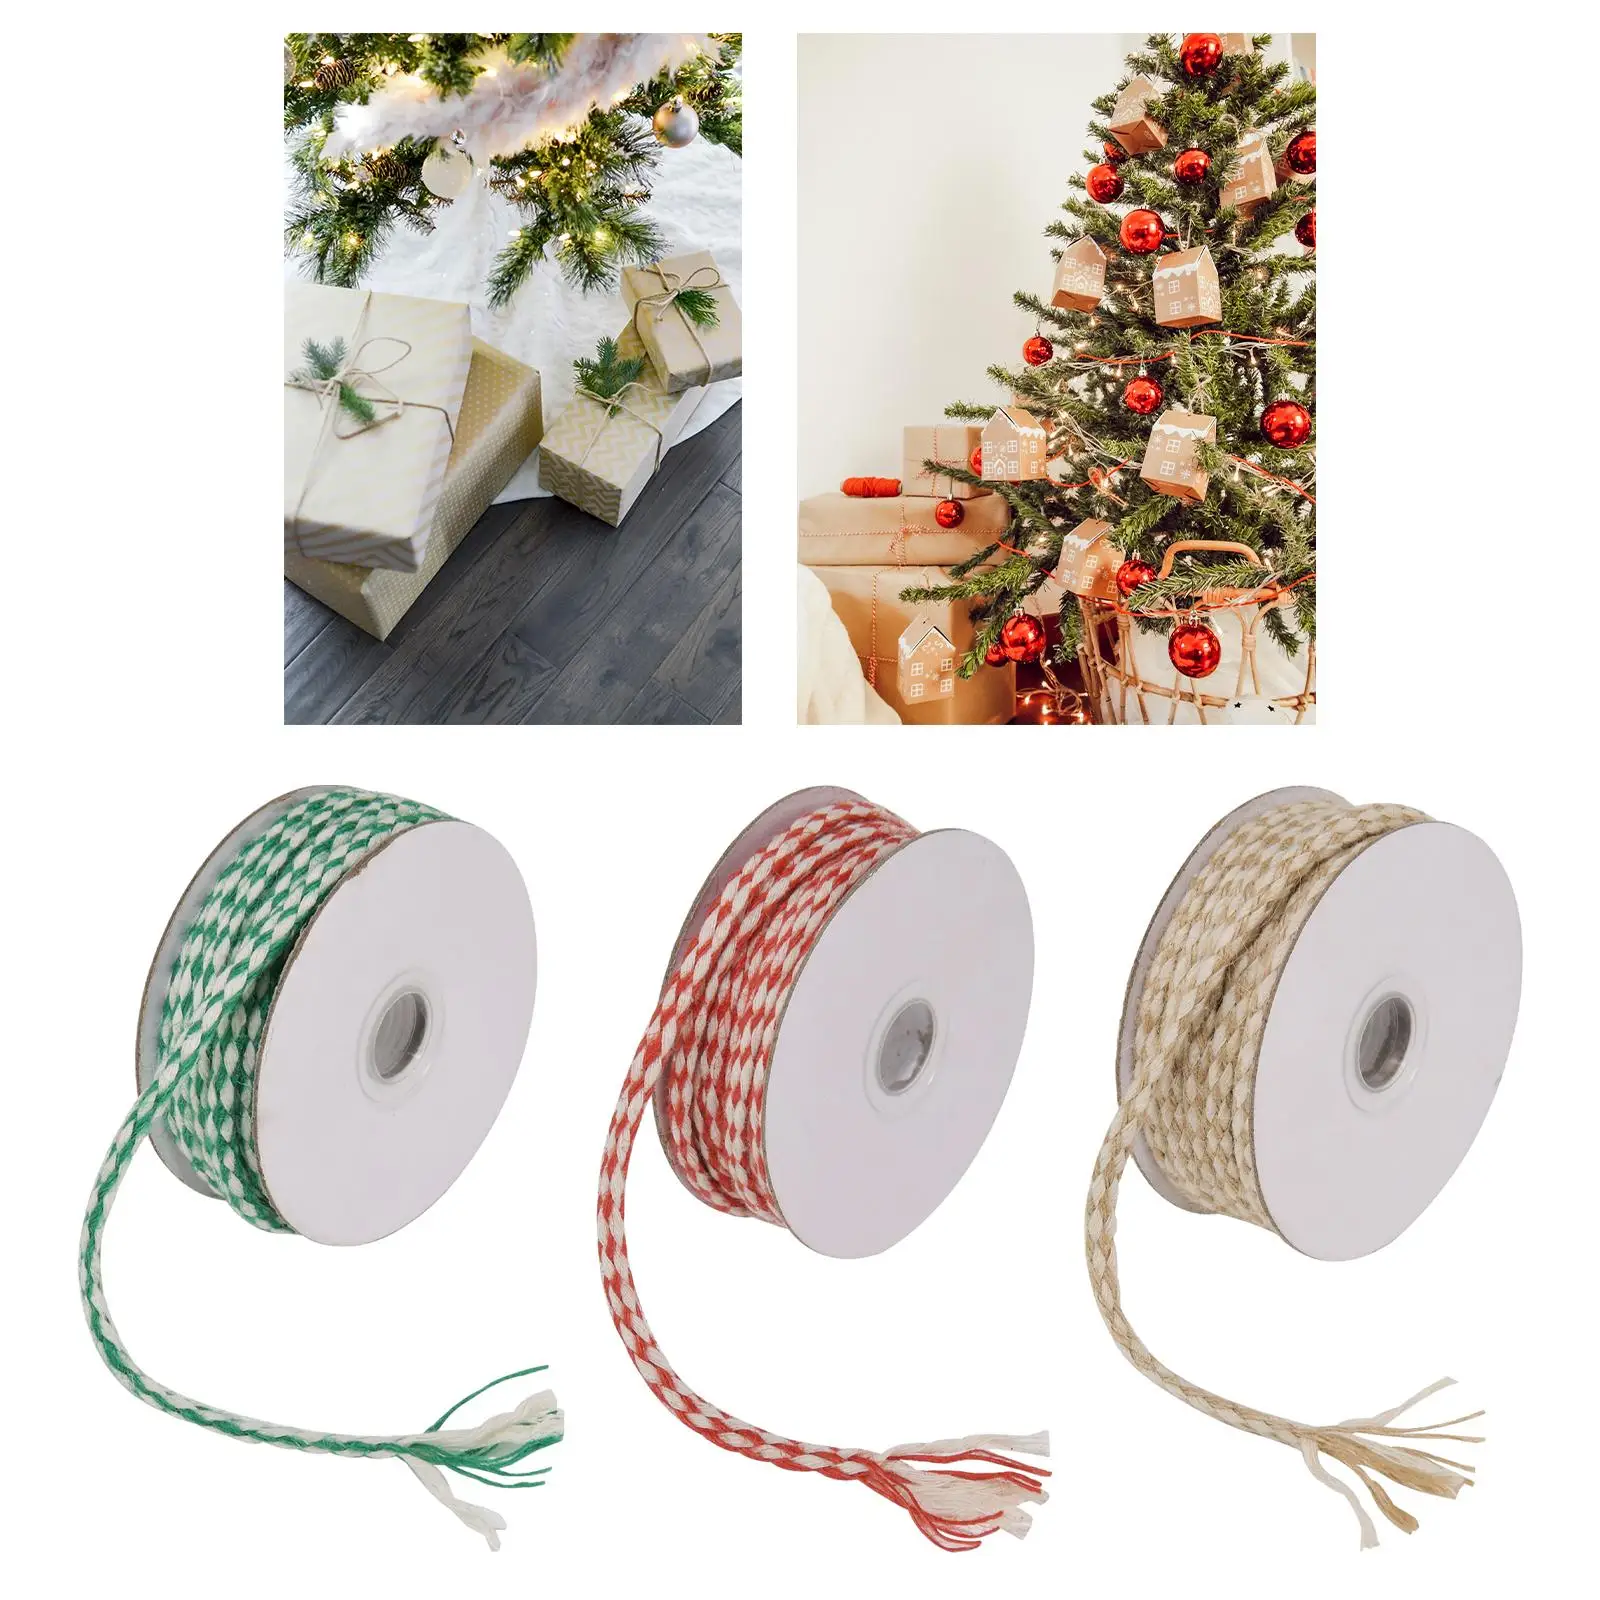 Gift Wrapping Cord String Garden Xmas DIY Crafts Hanging and Packing Arts and Crafts 10 Meters Jute String Twine Decoration